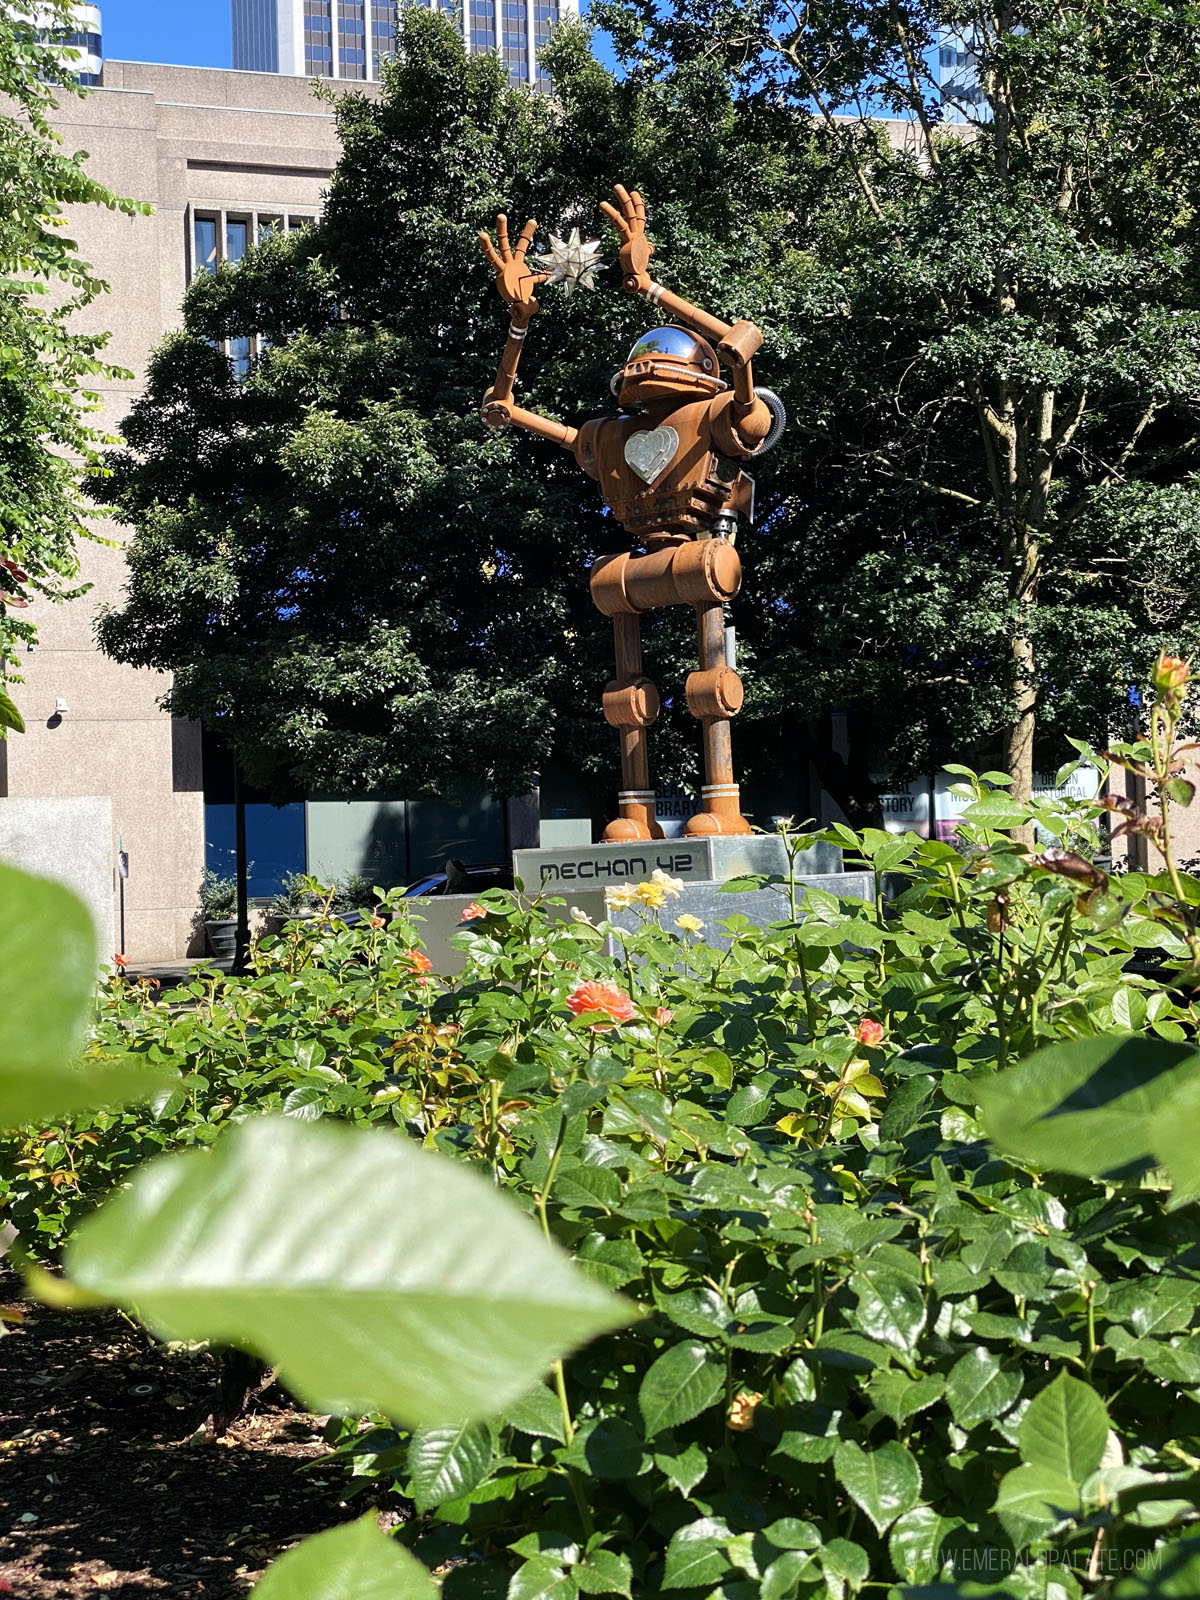 Robot sculpture in downtown PDX